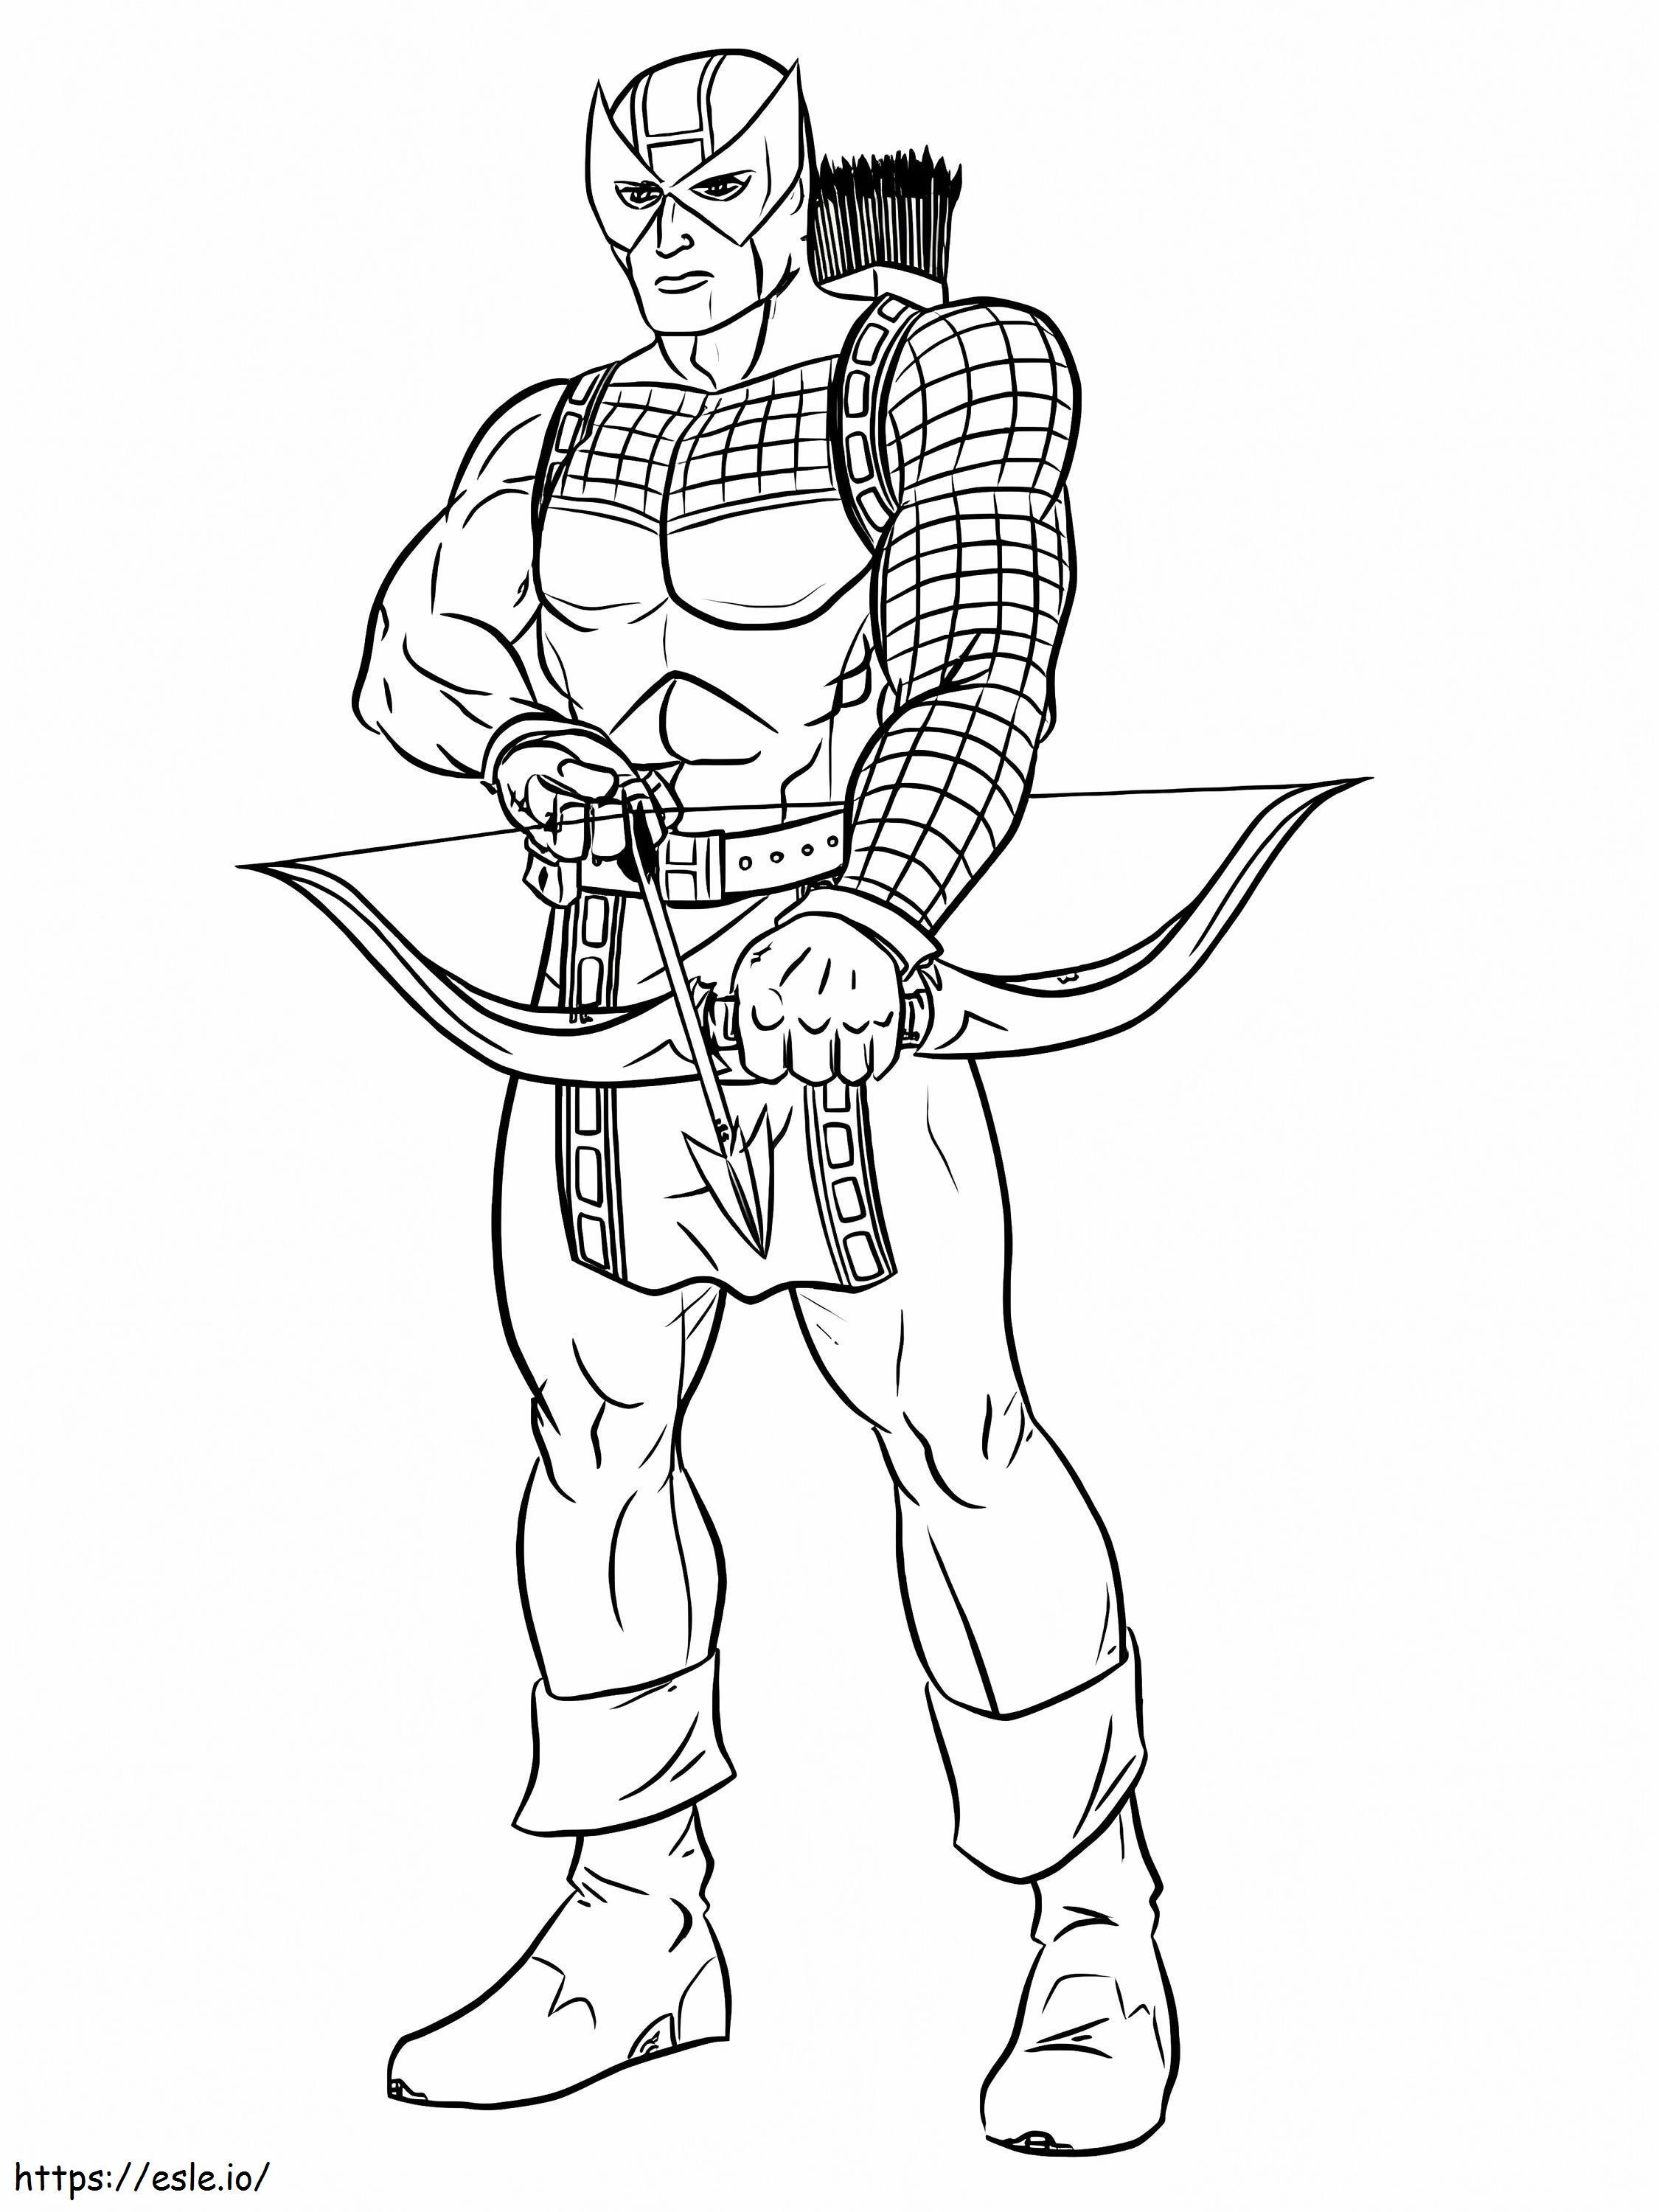 Amazing Hawkeye coloring page